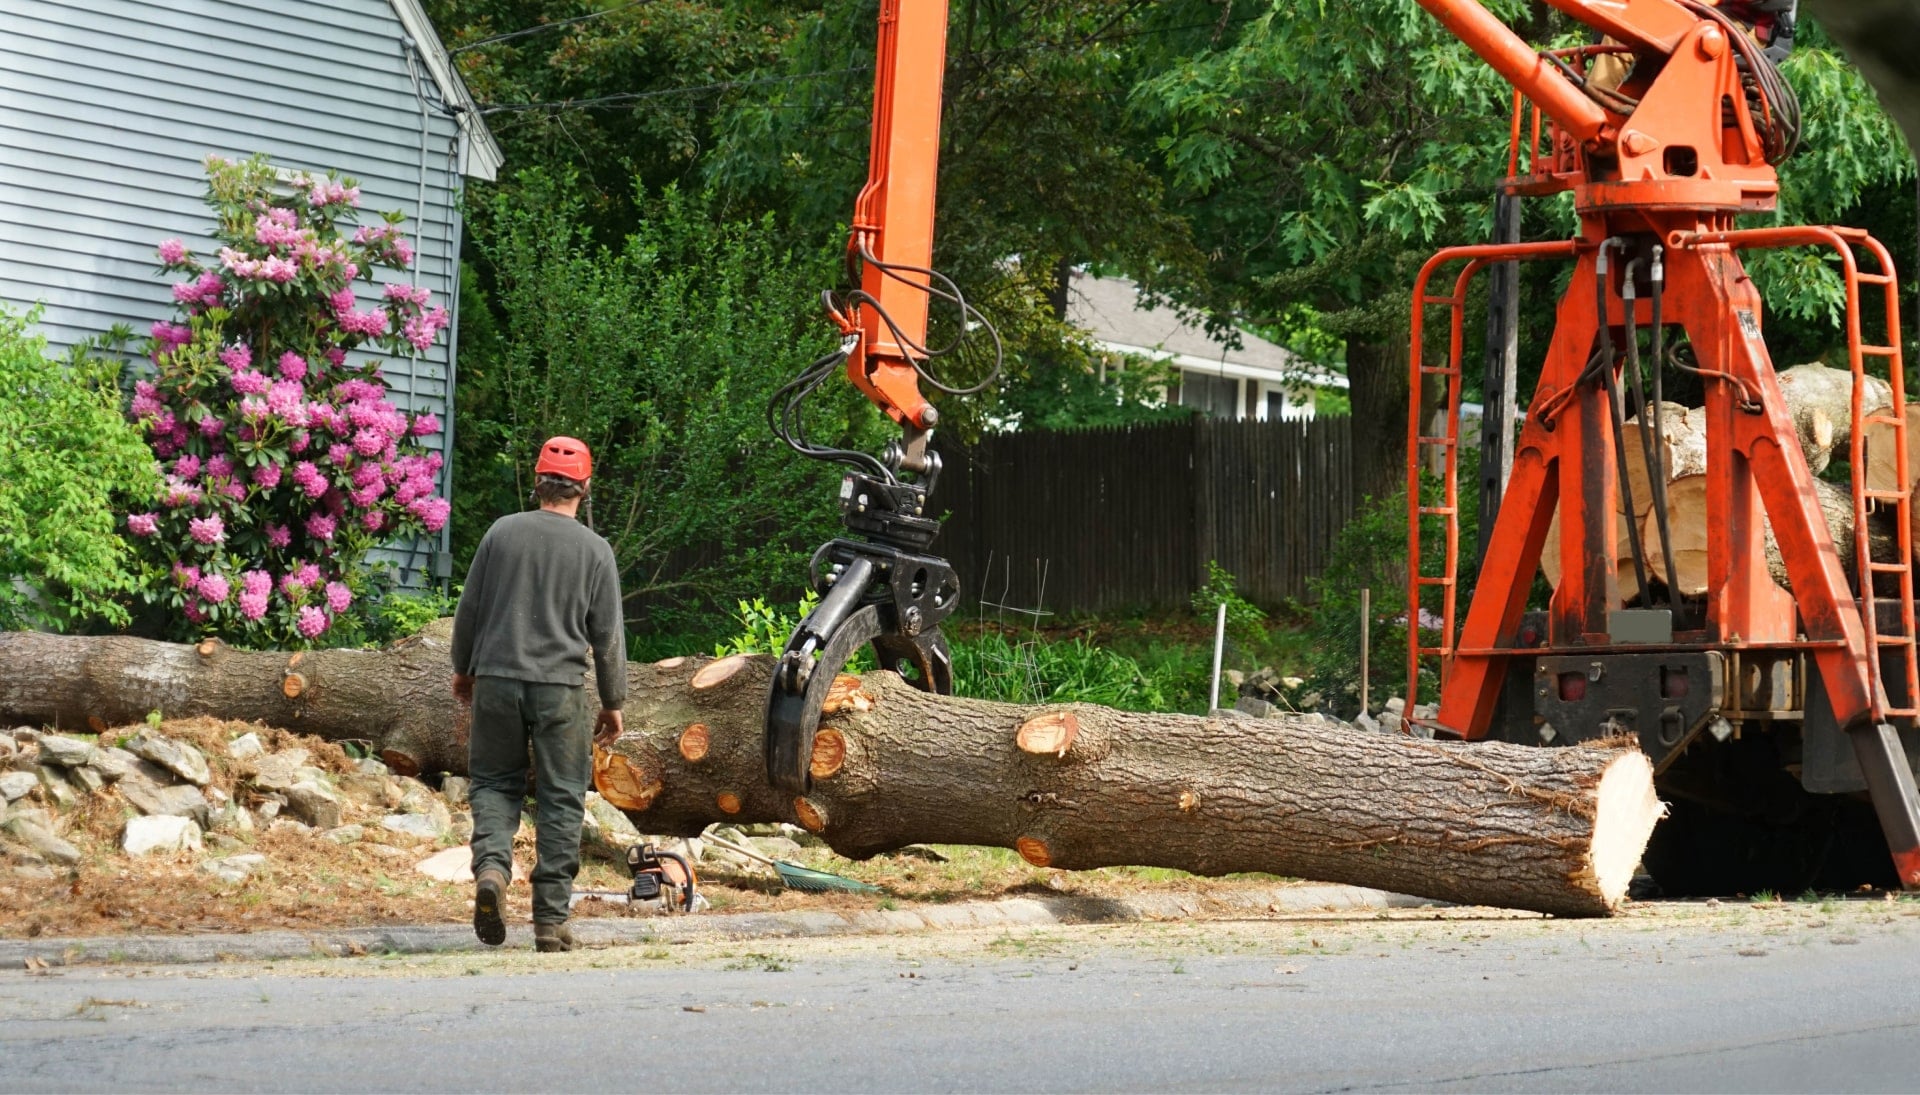 Local partner for Tree removal services in Oklahoma City